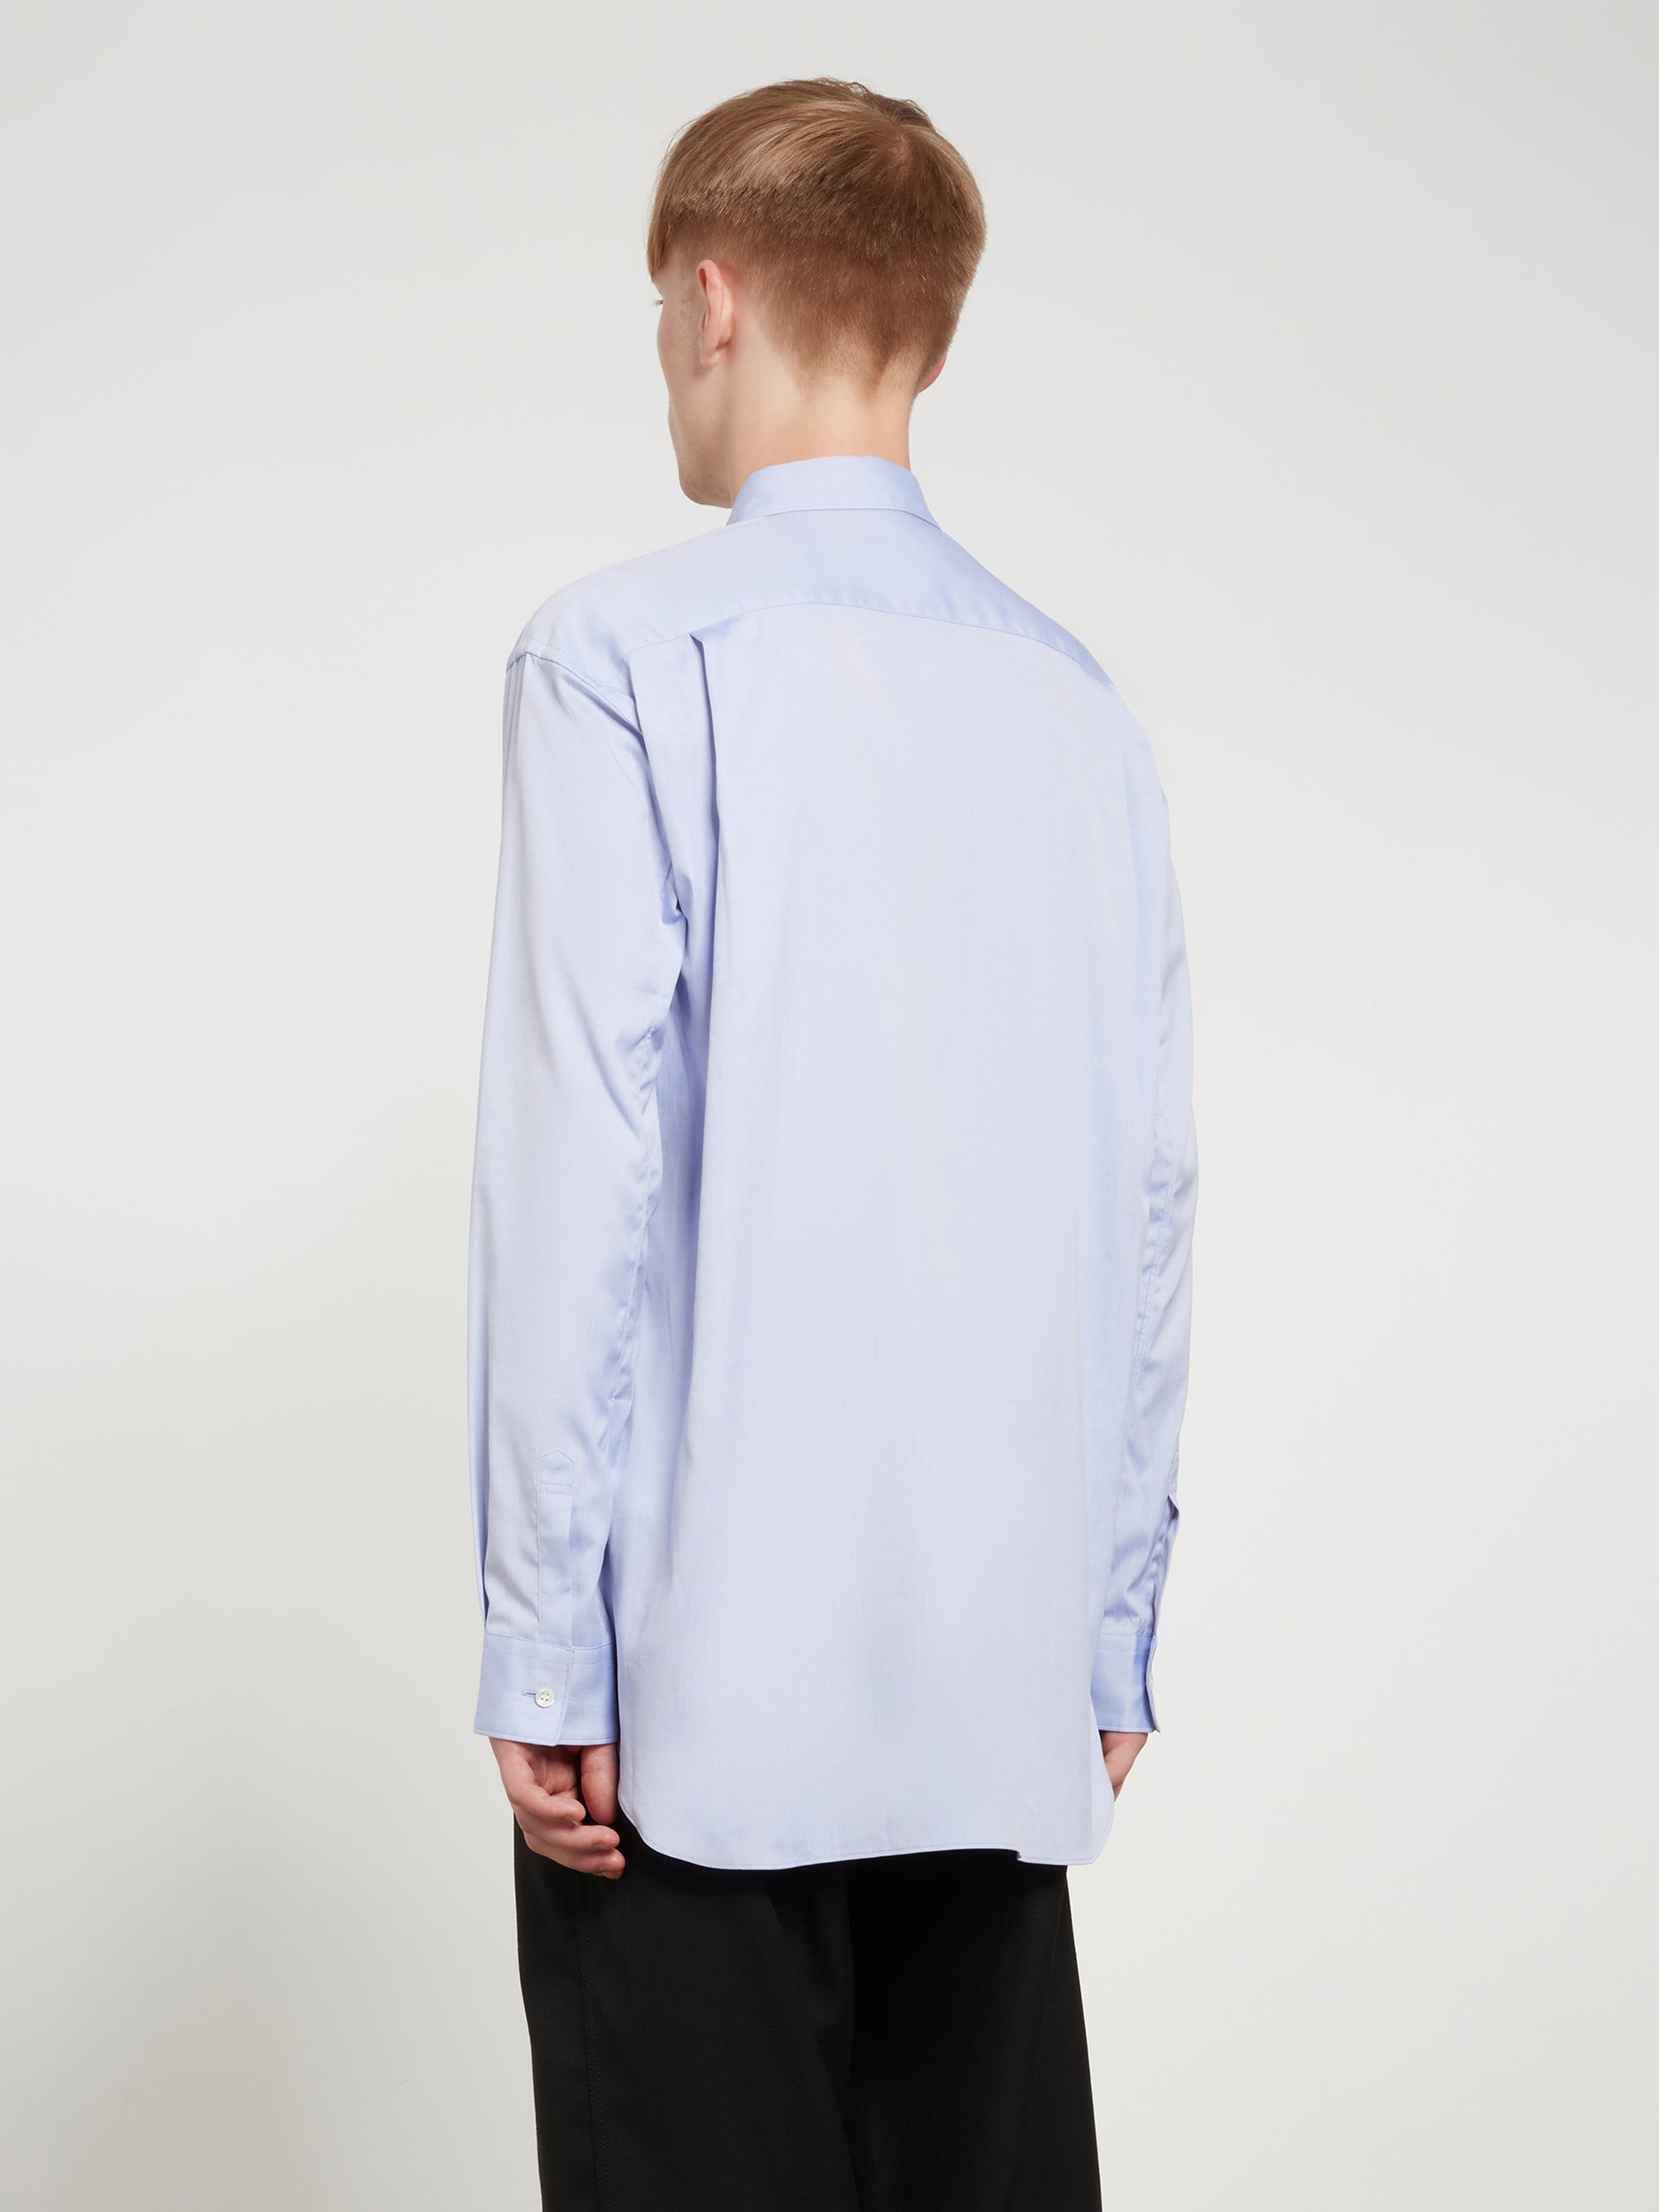 CDG Shirt Forever - Classic Fit Woven Cotton Shirt - (Light Blue) view 4